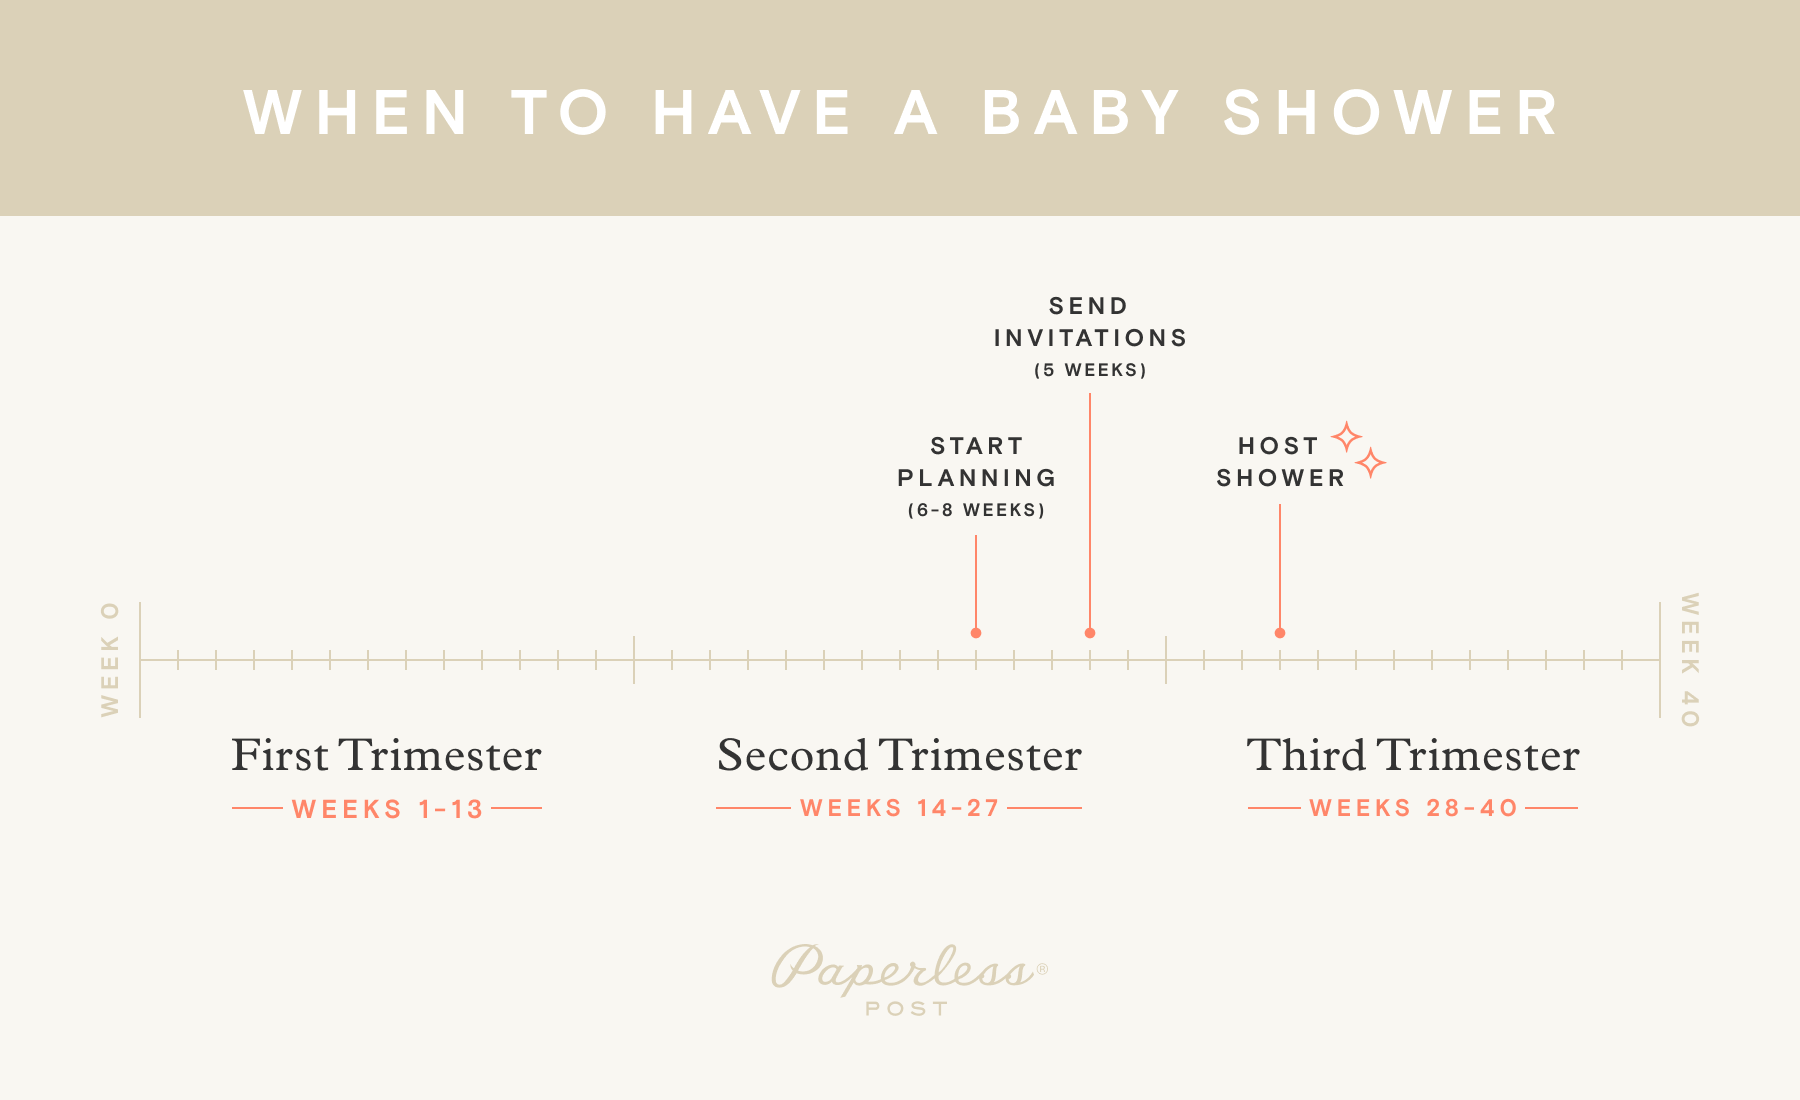 An infographic summarizes when to plan and send baby shower invitations by pregnancy trimester, as described elsewhere in this article.